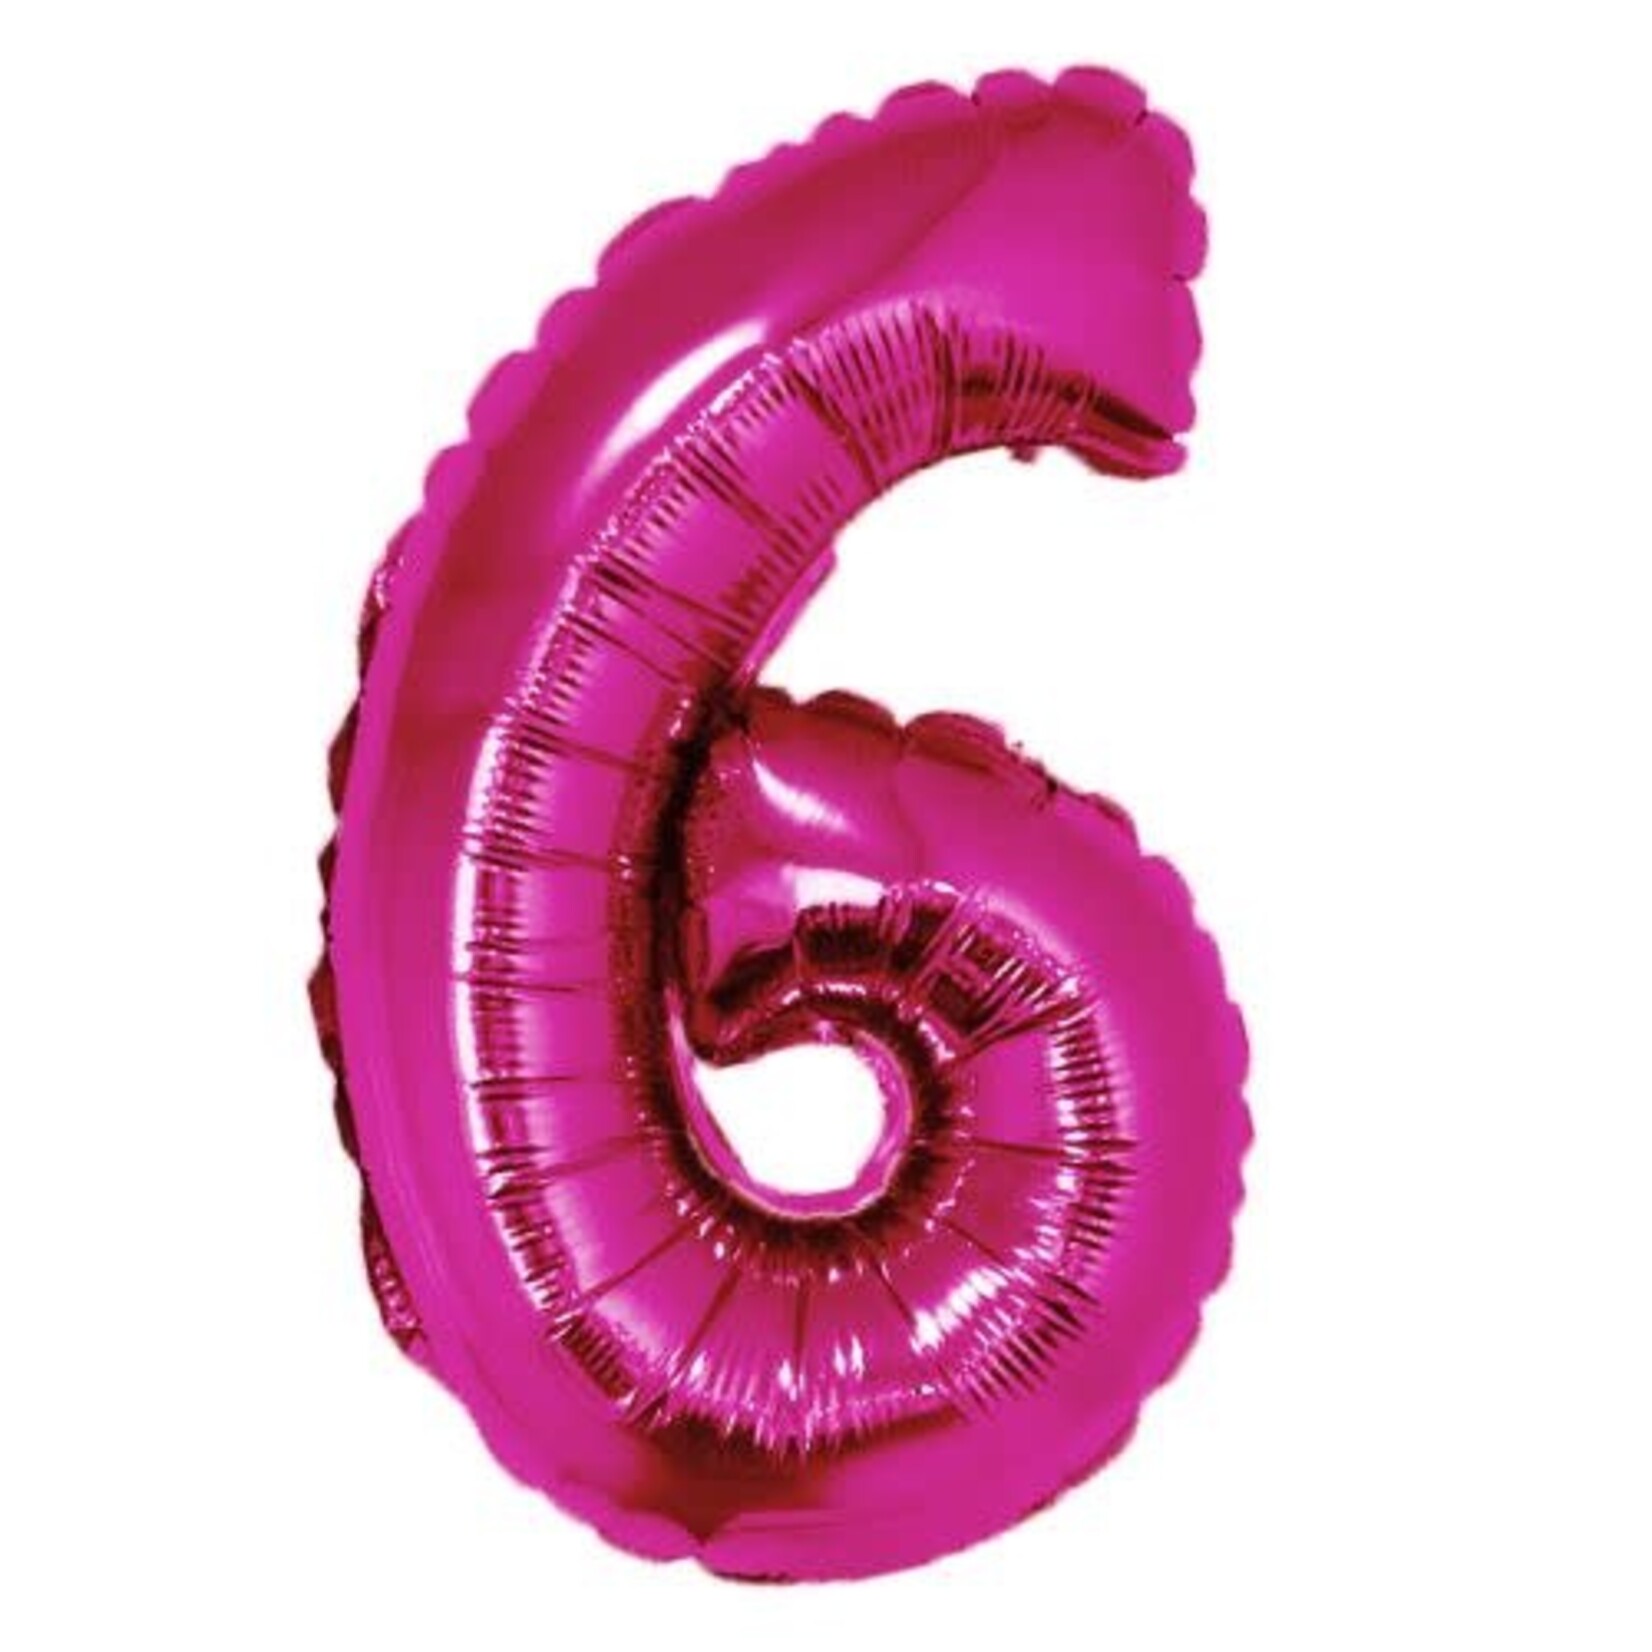 40" Hot Pink Mylar Number Balloons